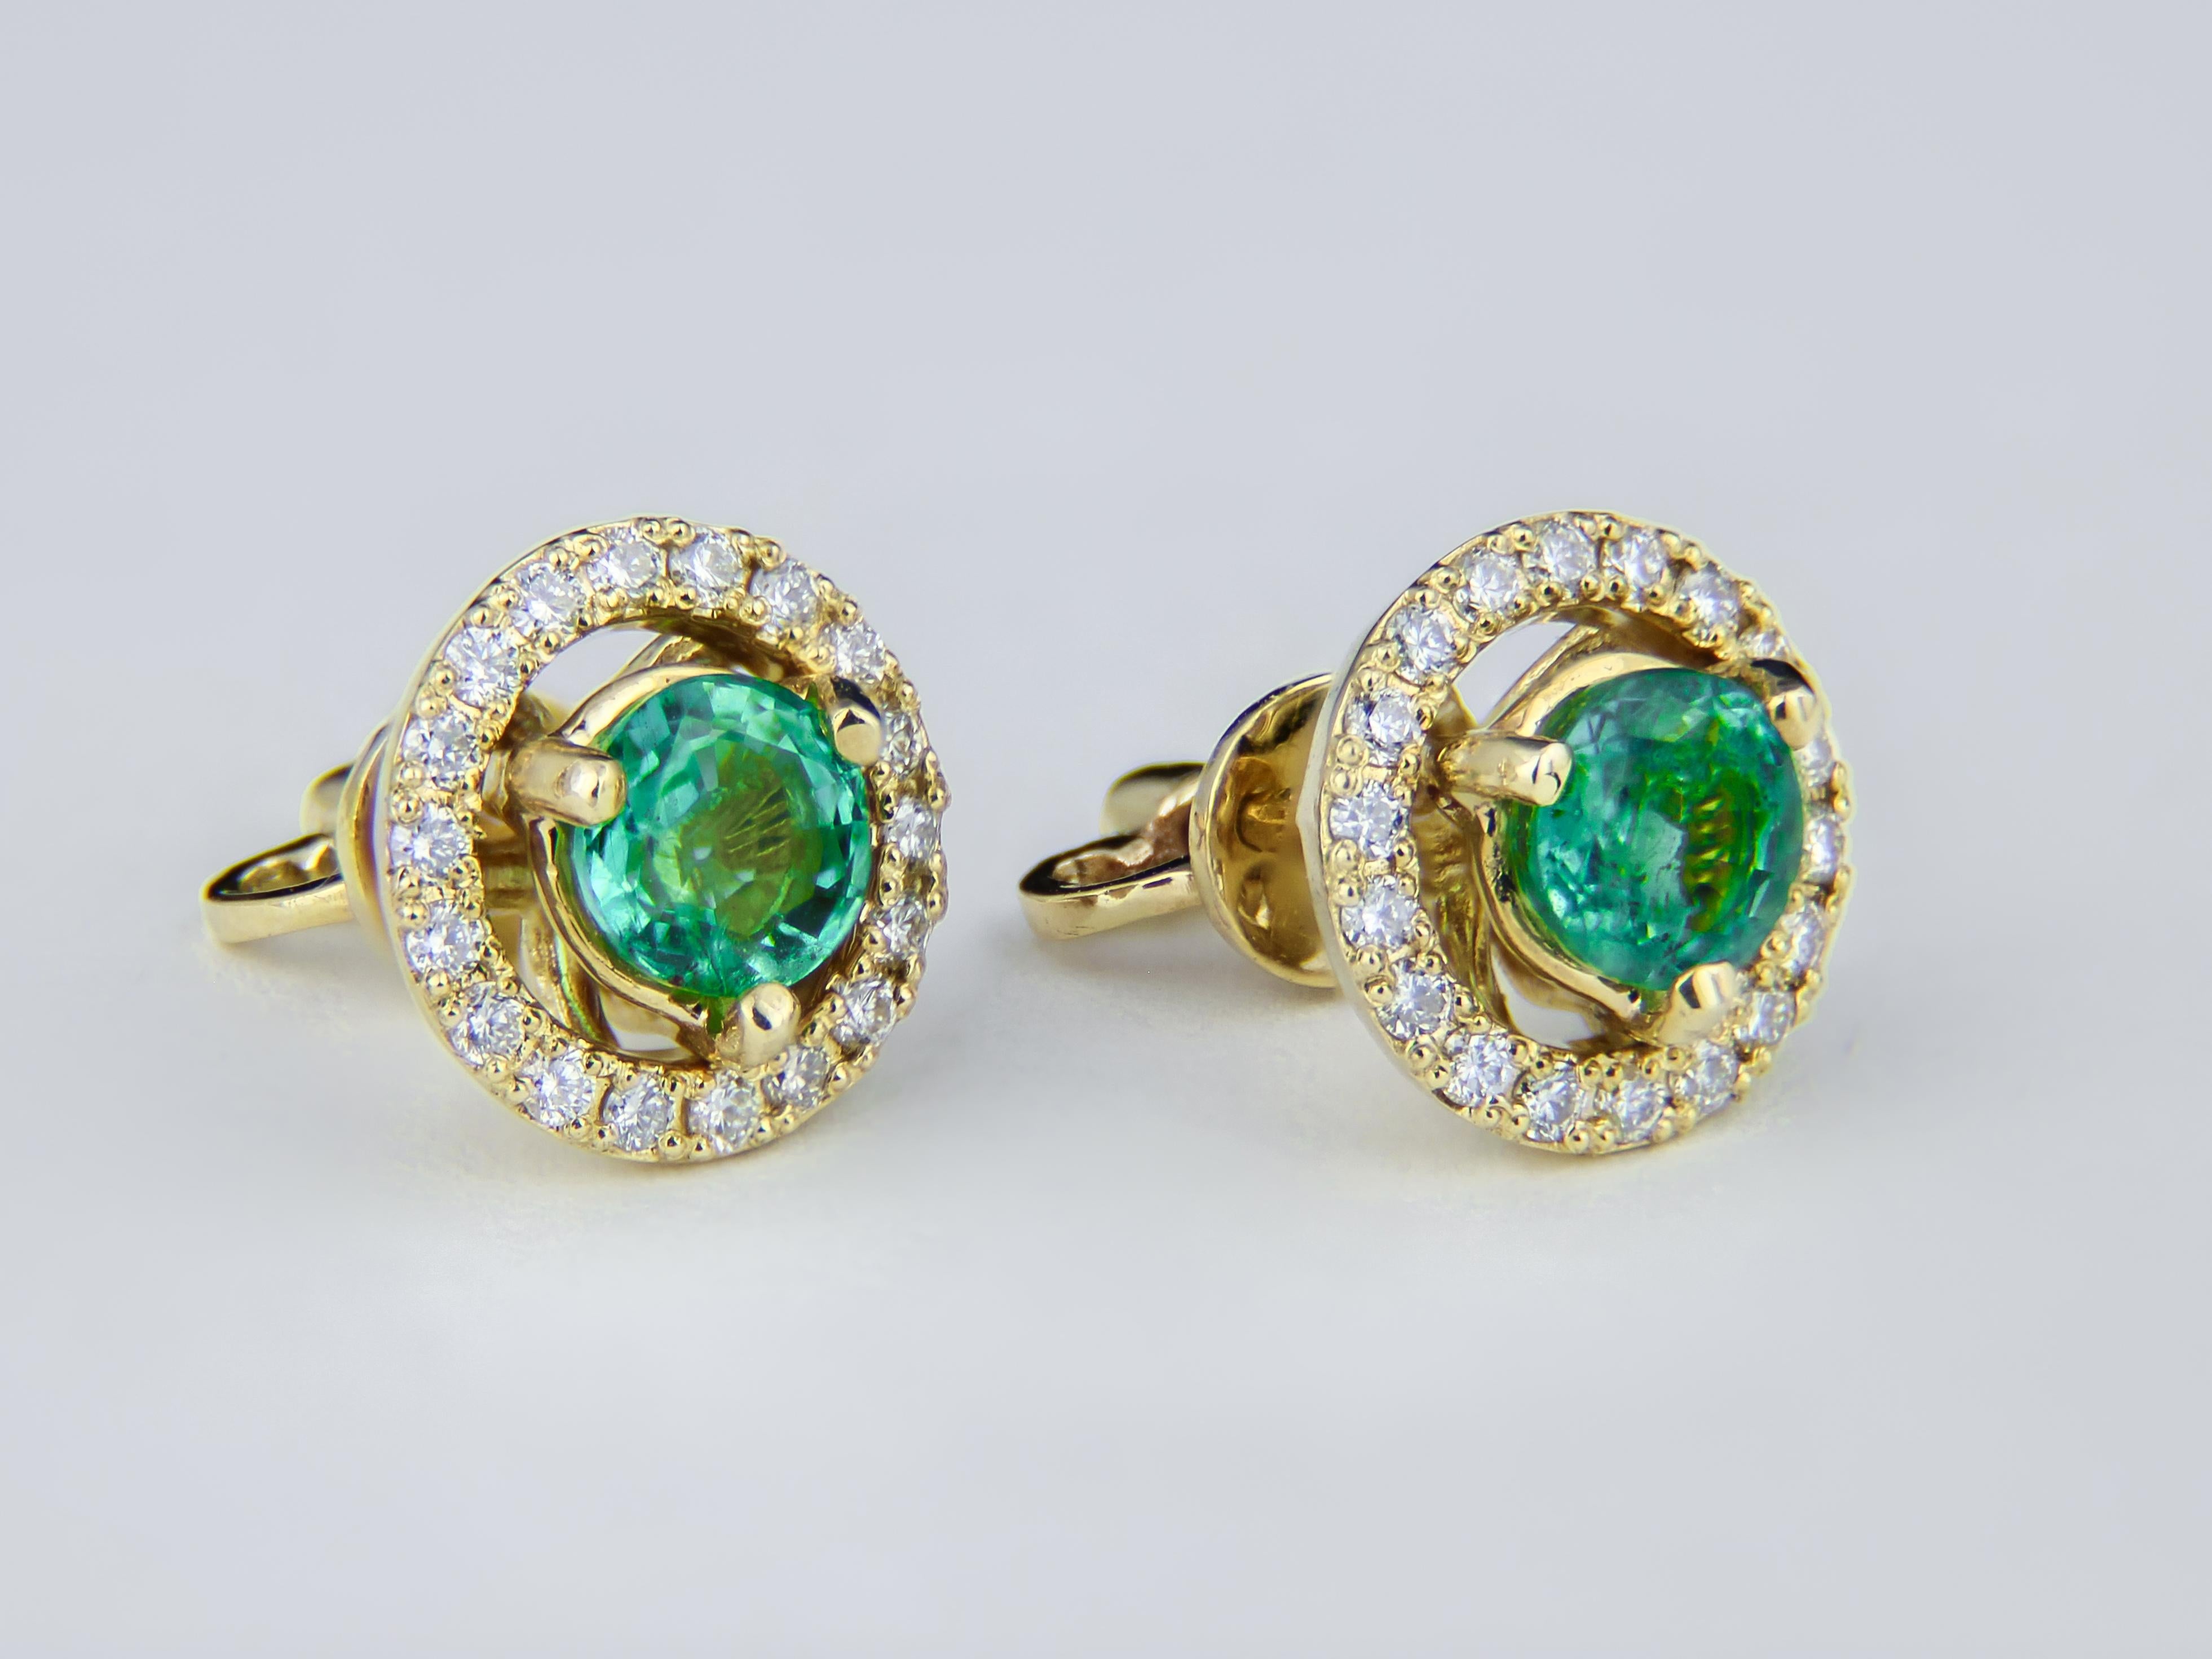 Round Cut Emeralds 14k Gold Earrings Studs, Removable Jackets Round Emerald Earrings For Sale